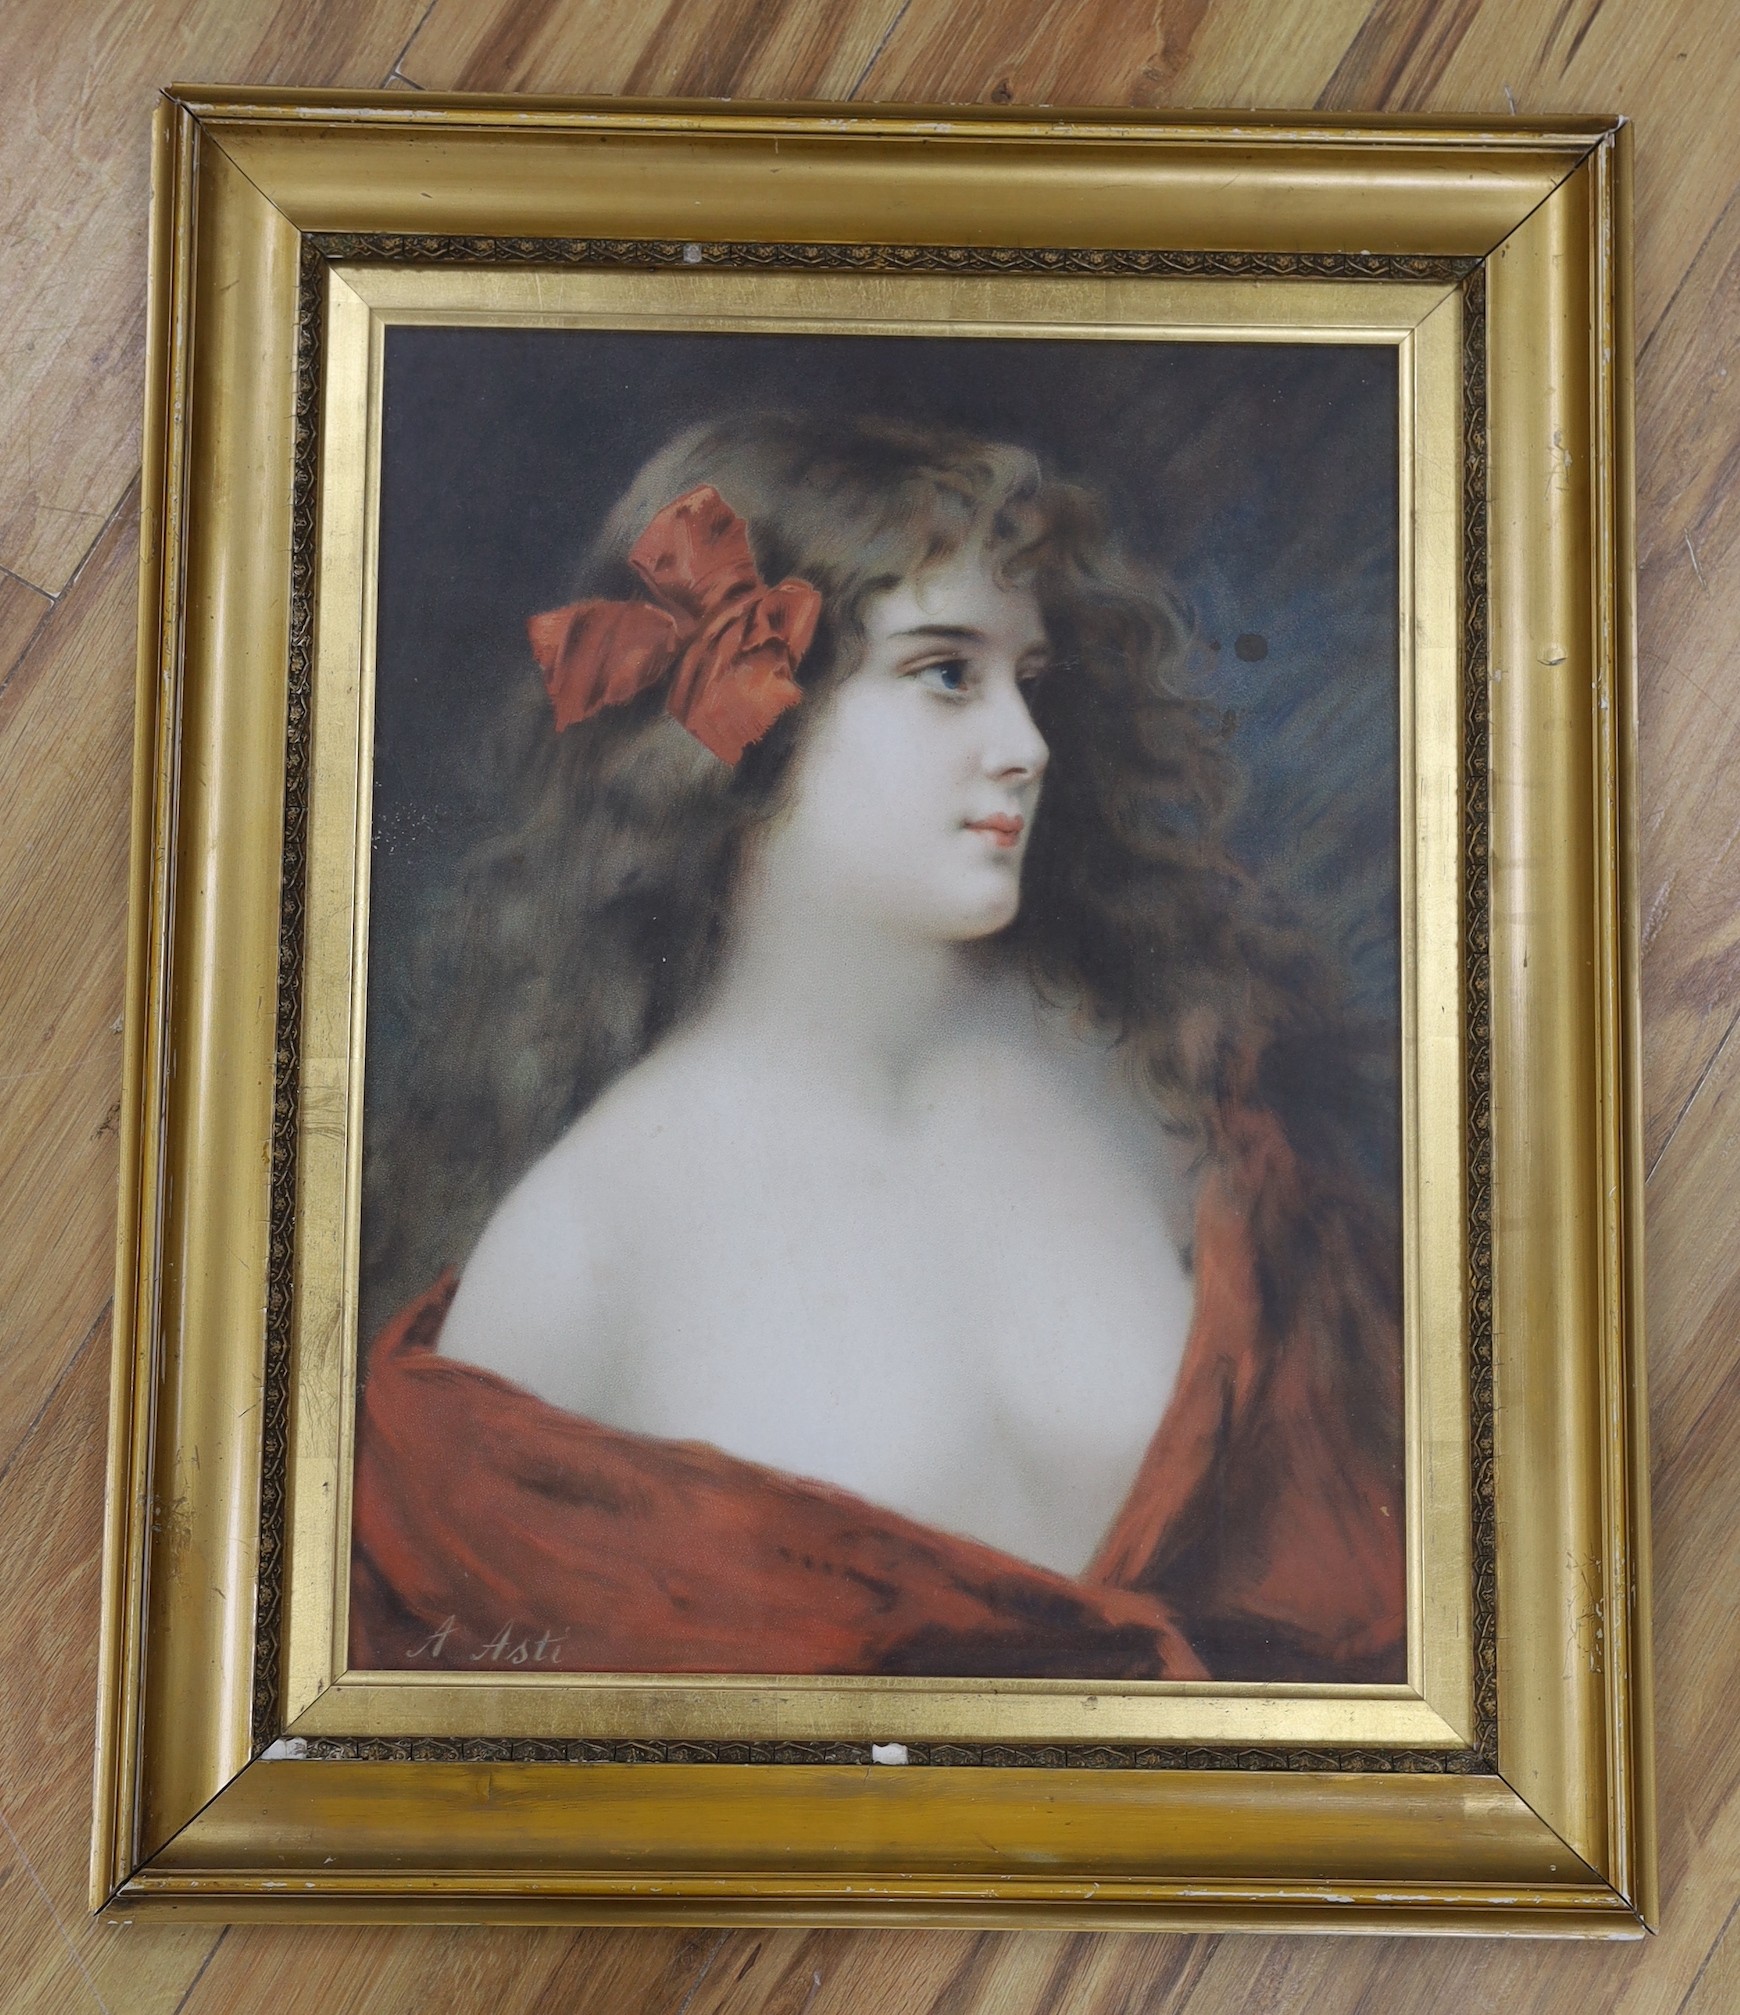 Angelo Asti (Italian, 1847-1903), chromolithograph, Portrait of a young woman with a ribbon in her hair, 50 x 39cm